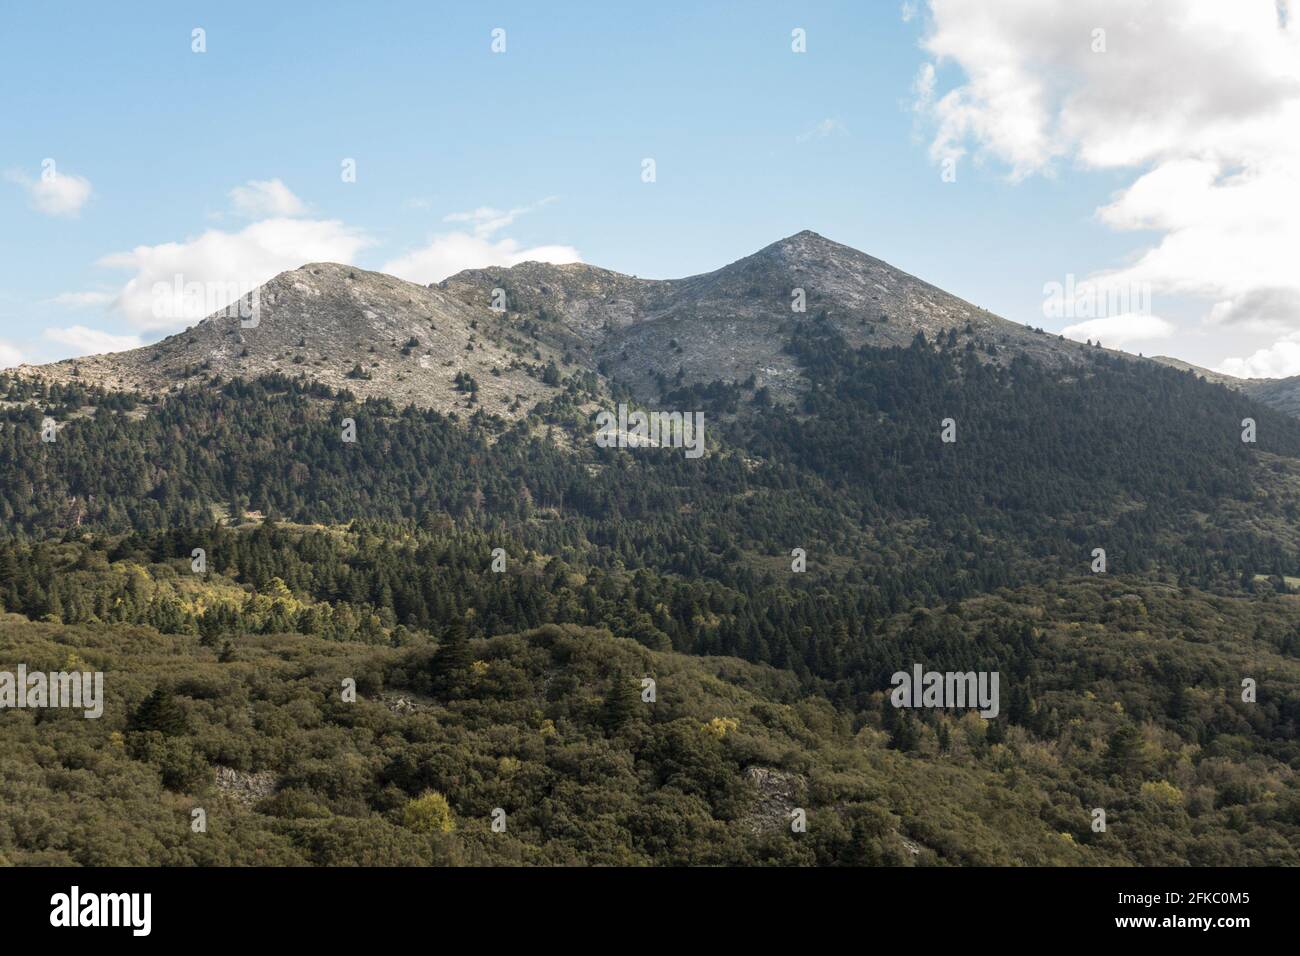 Sierra de las Nieves, natural park, within the Serrania de Ronda, with Spanish fir trees, Andalusia, Southern Spain. Stock Photo